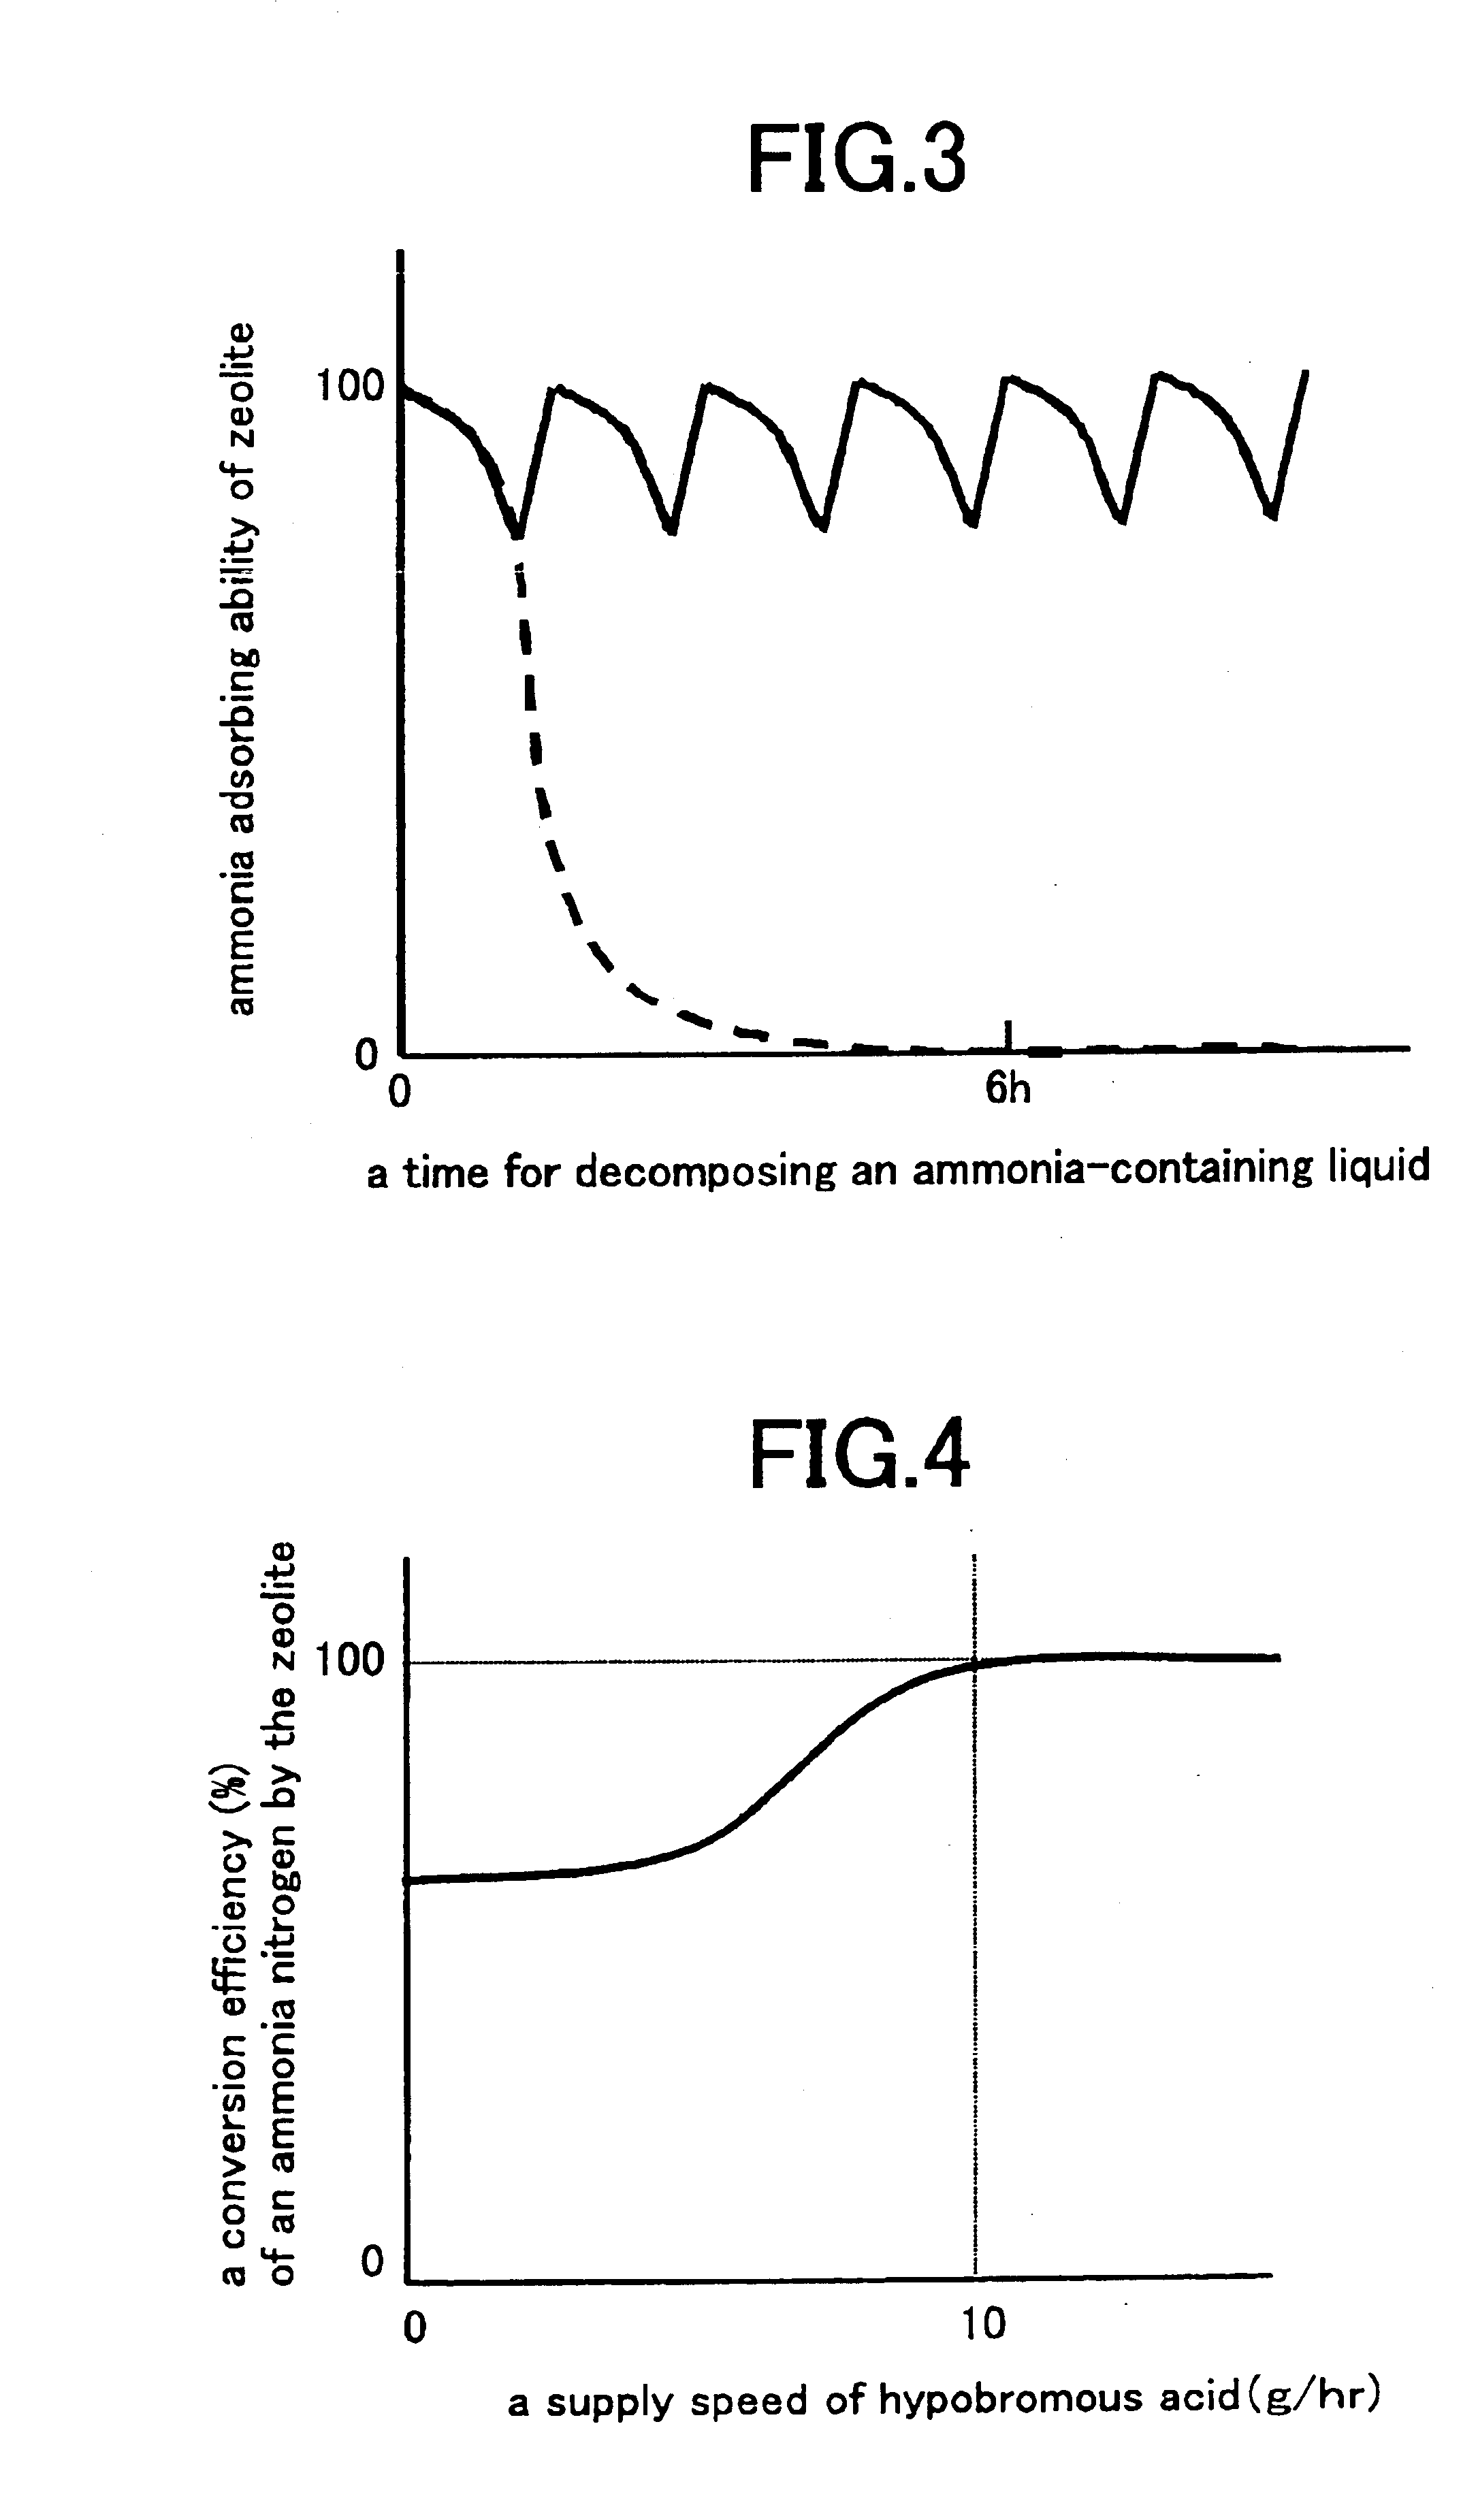 Method and apparatus of treating water containing a nitrogen compound